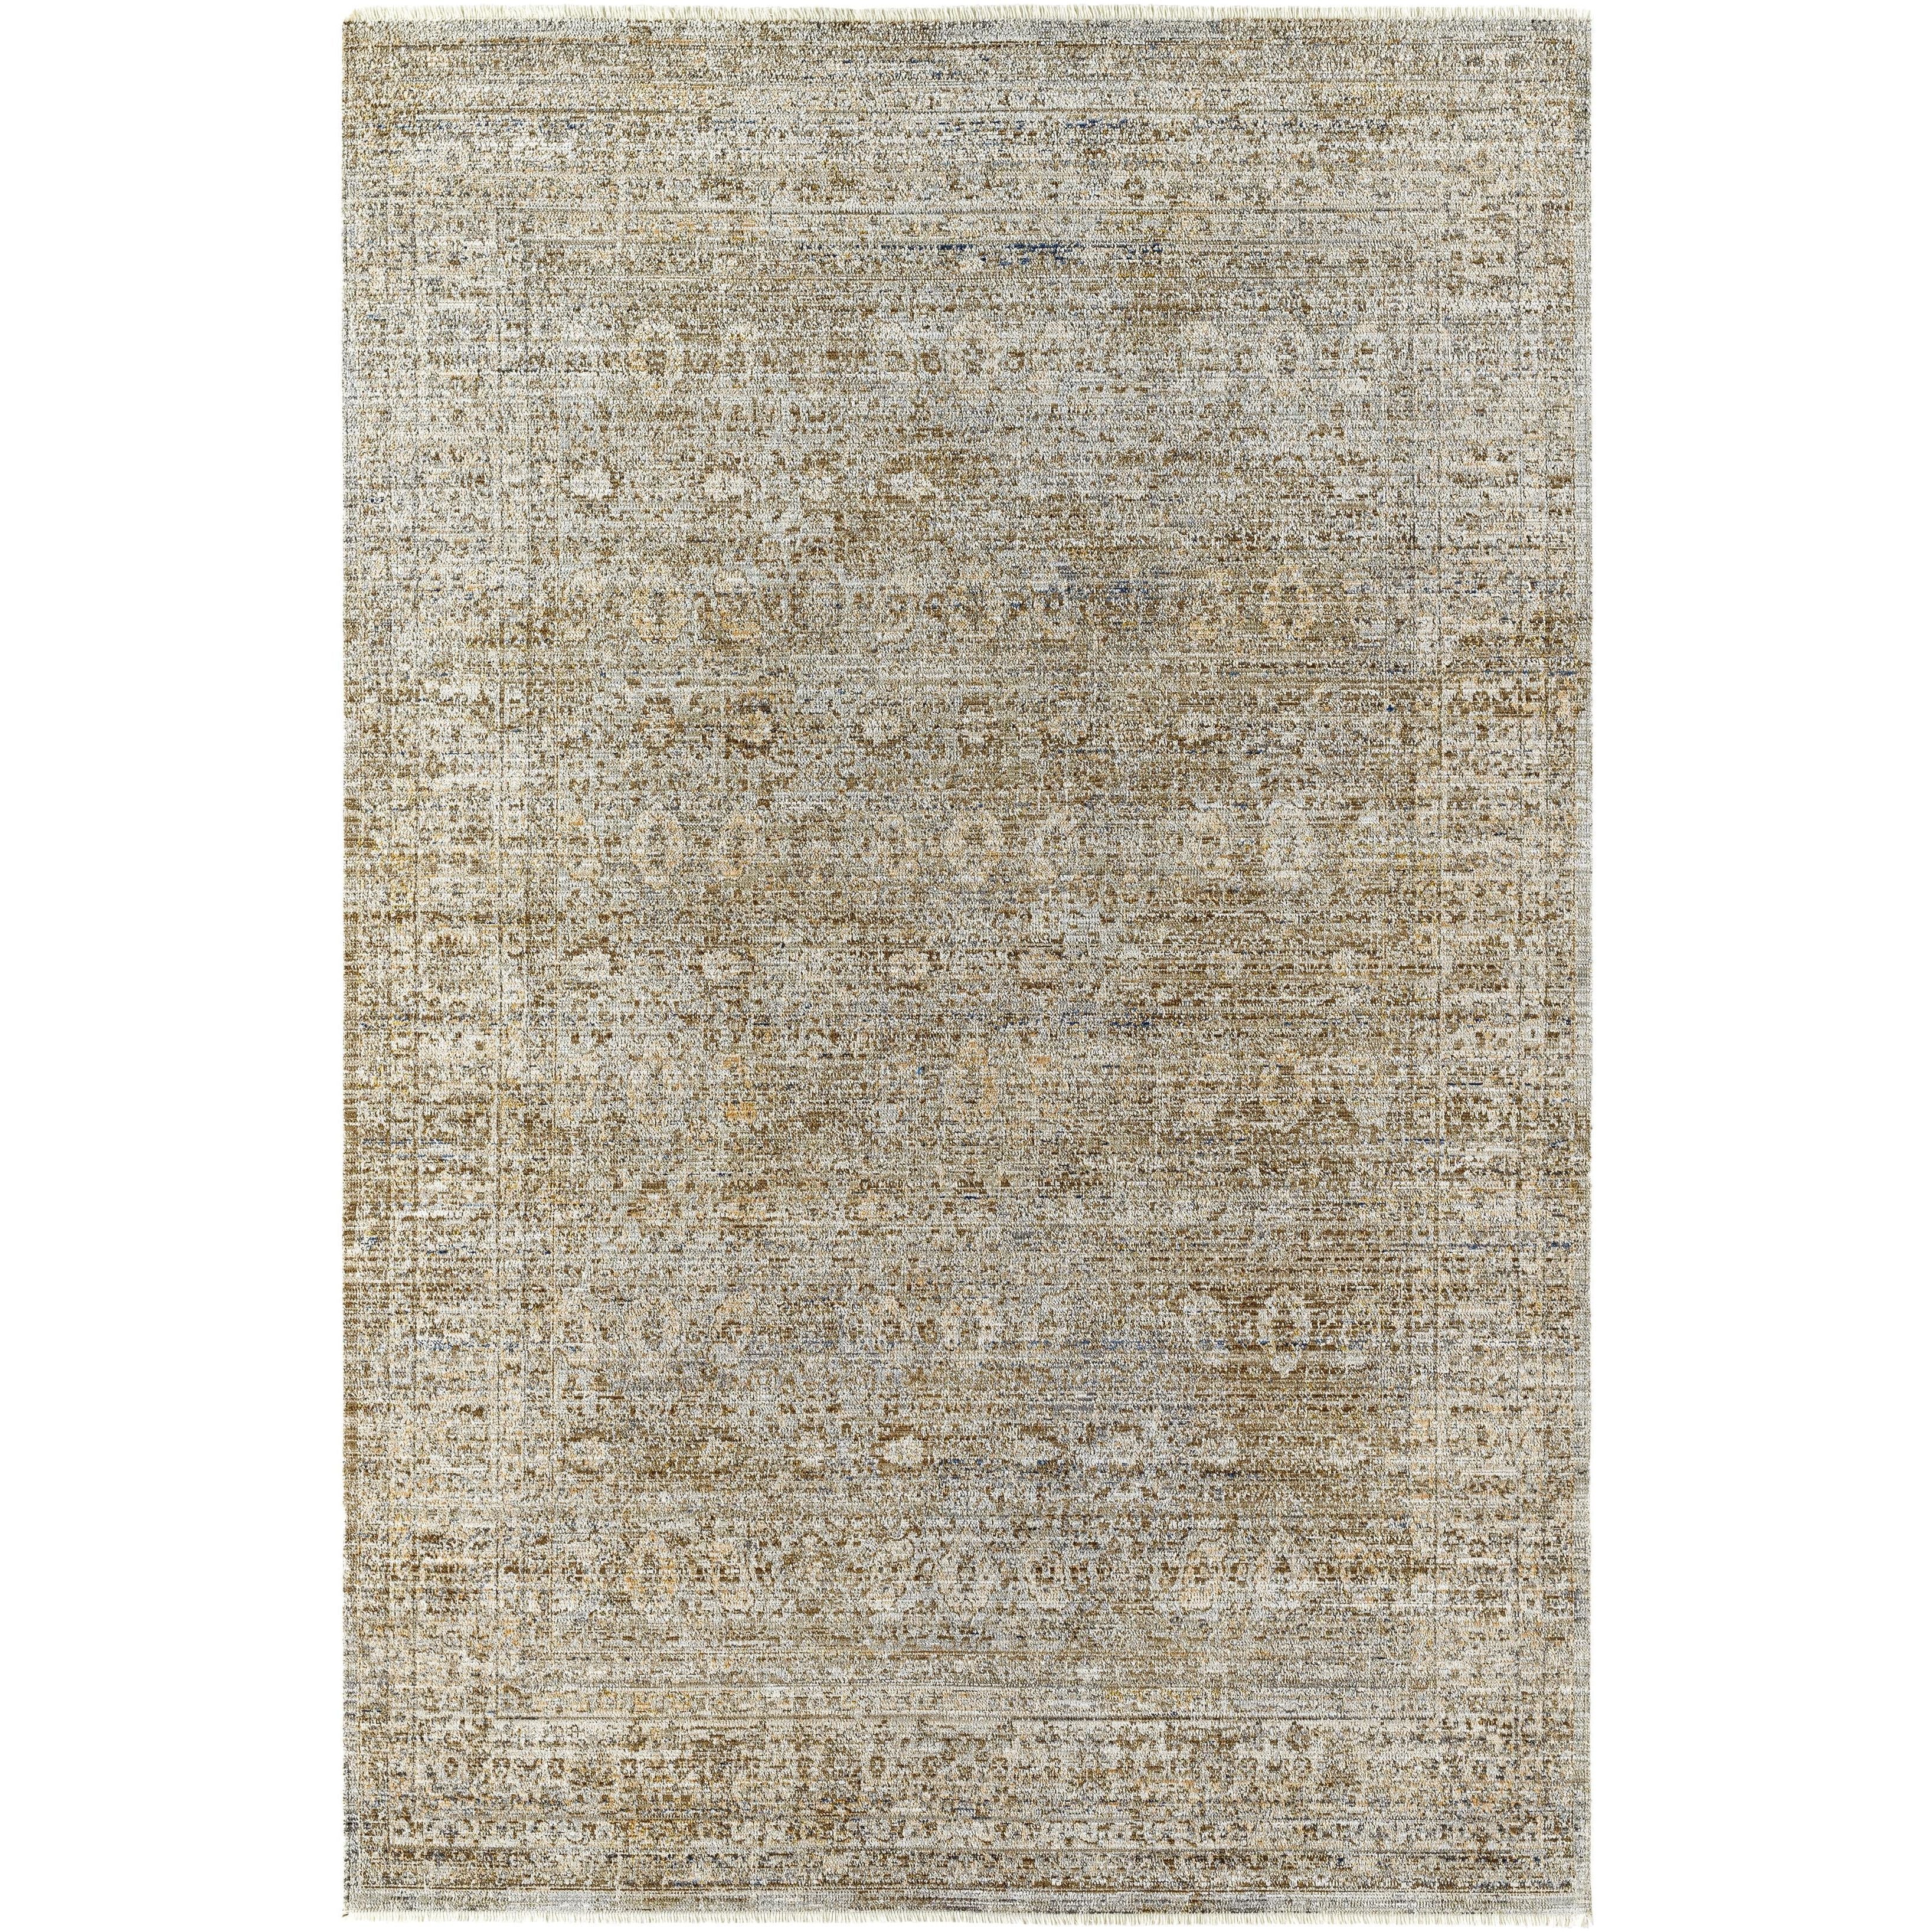 Introducing the Margaret area rug, a stunning collaboration between Surya and Becki Owens! This unique piece is sure to bring a touch of elegance to any room. Amethyst Home provides interior design, new home construction design consulting, vintage area rugs, and lighting in the Austin metro area.